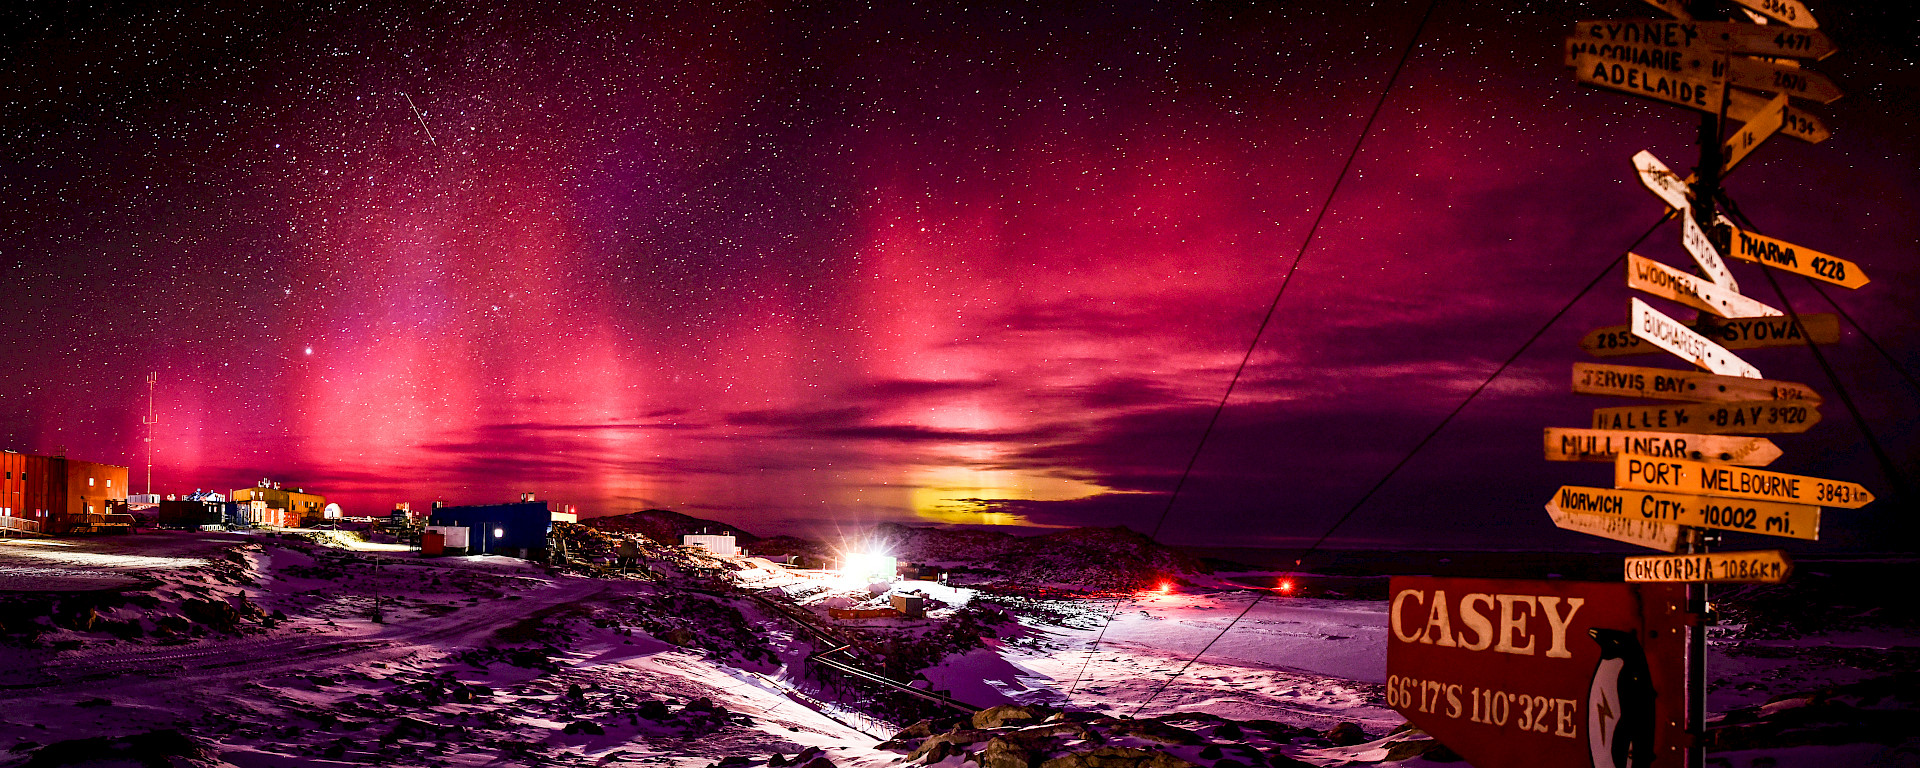 Panorama of the Aurora Australis in the red spectrum over Casey station on clear starry night